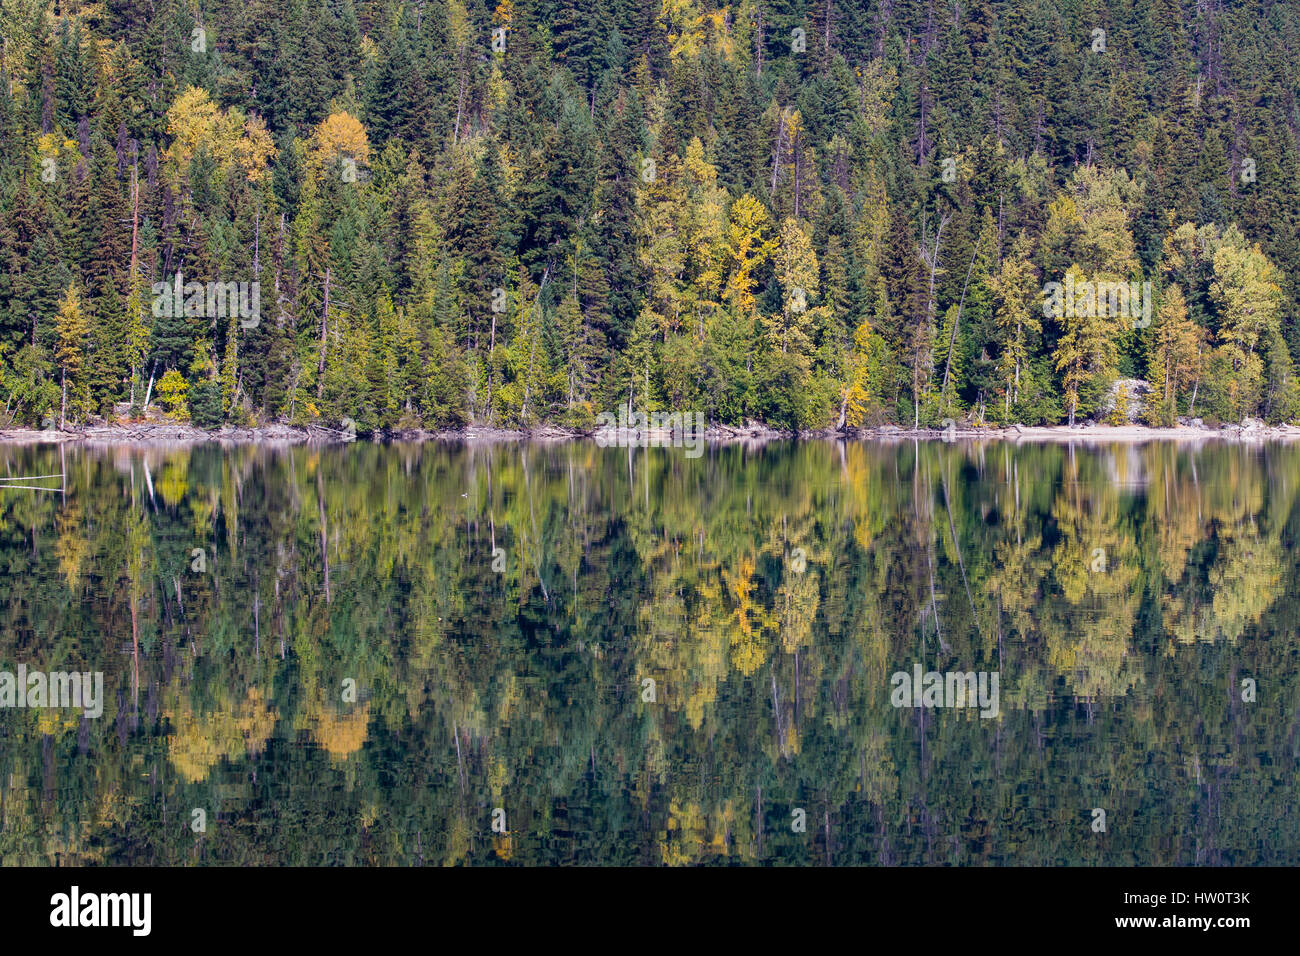 Symmetry and Fall colours.  Calm waters of Birkenhead Lake, BC, reflect wonderful mixed forest in mirror-like waters. Stock Photo